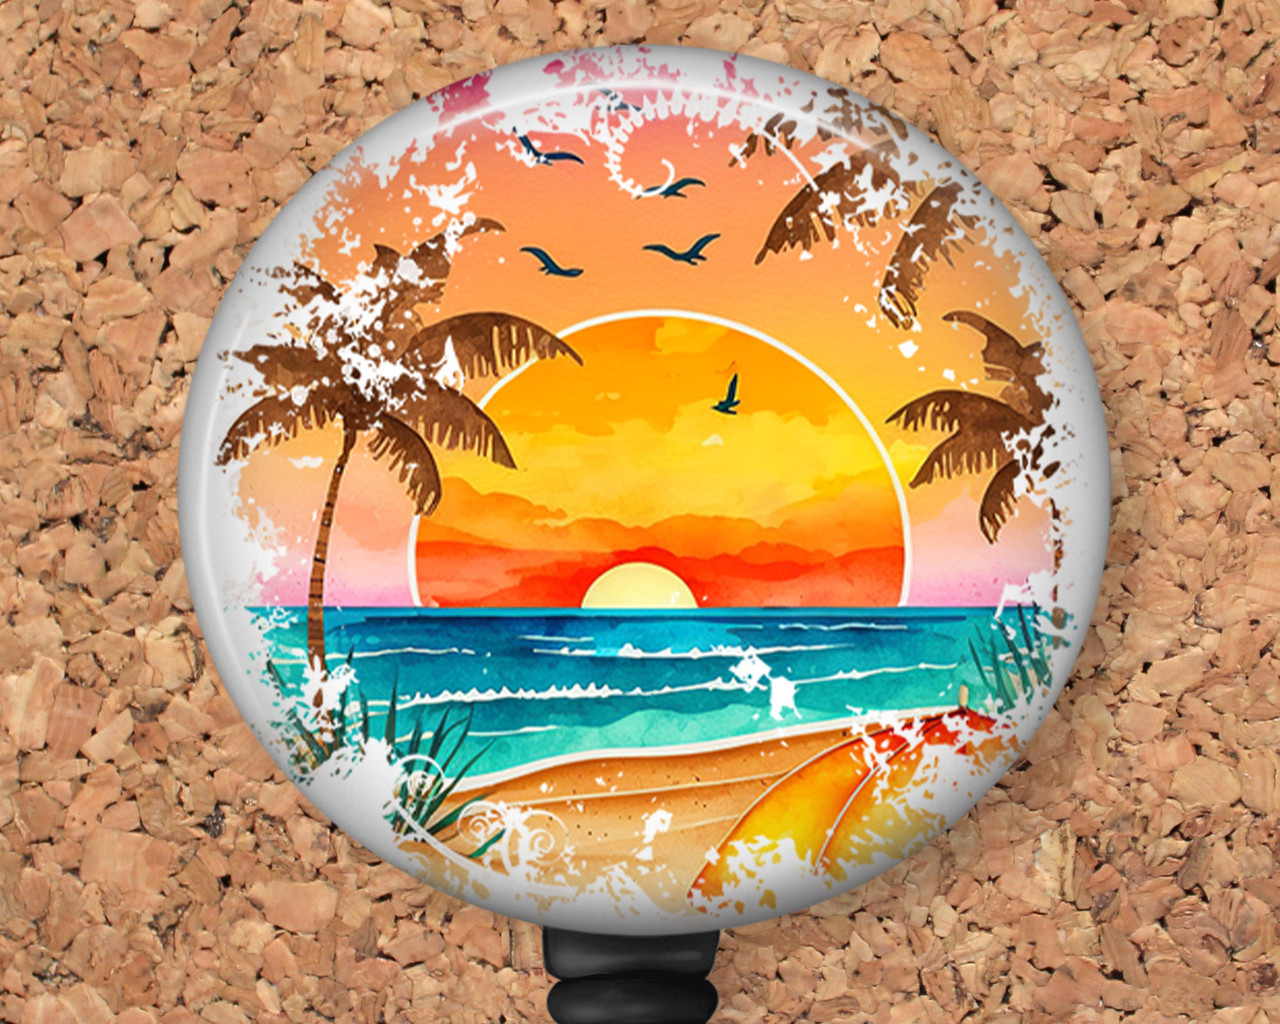 Send Your Own Photo ID Badge Reel, Lanyard, or Carabiner - The Badge Patch  (A Crystal Garden LLC)